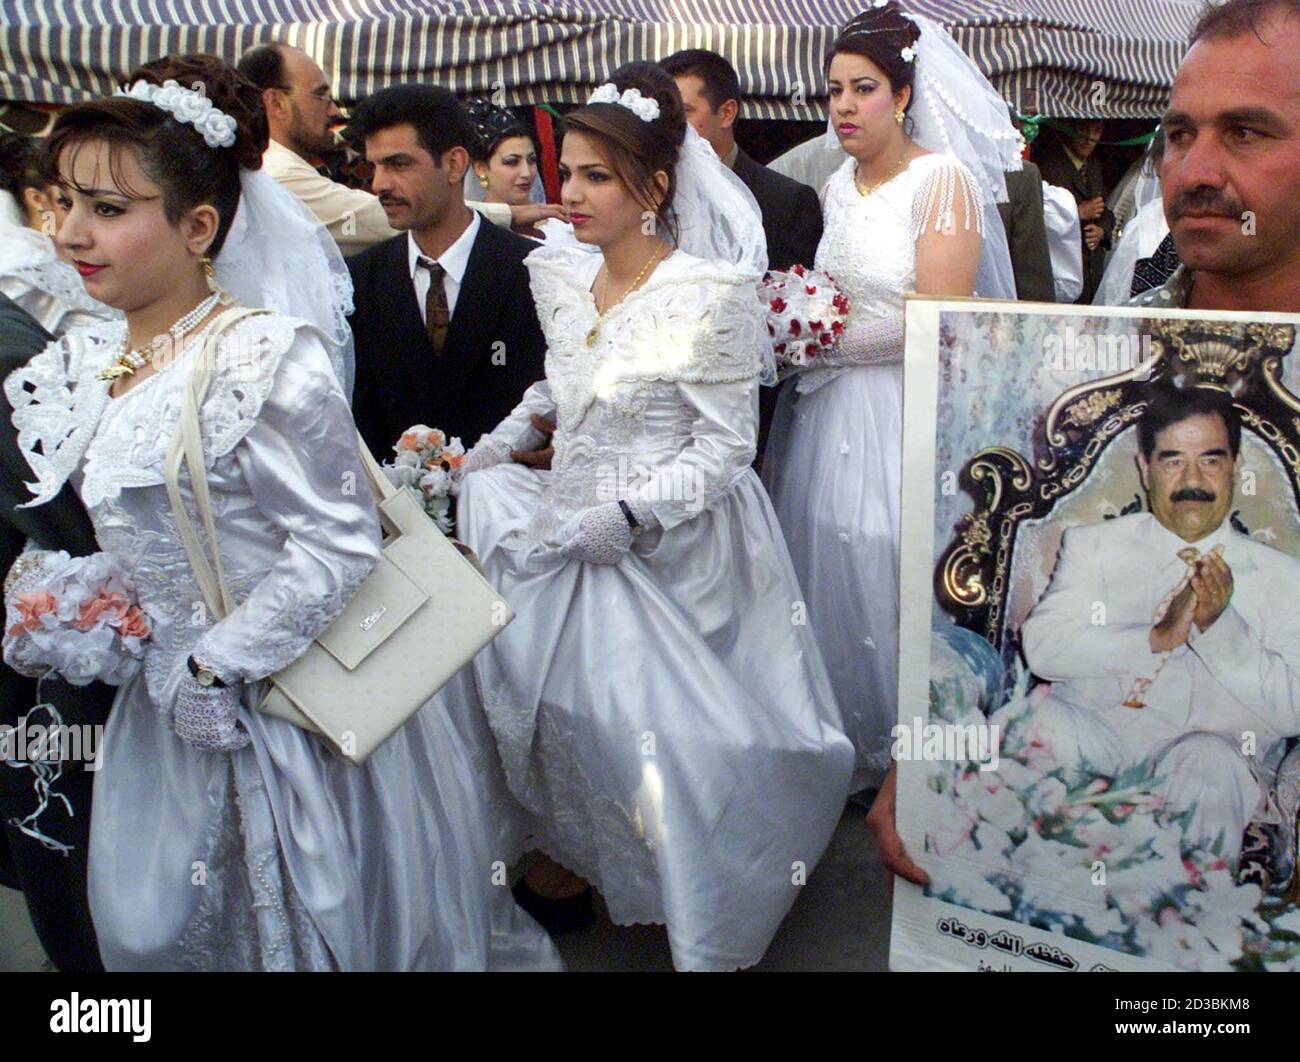 Brides and bridgegrooms pass a portrait of Iraqi President Saddam Hussein during a mass wedding of around 300 couples Baghdad, April 25, 2002 as part of the country's celebrations of the President's birthday on Sunday. Iraq's government usually arranges mass weddings to encourage Iraqis to get married.  Economic hardships because of more than 11 years of crippling sanctions make many Iraqis refrain from marriage. Stock Photo